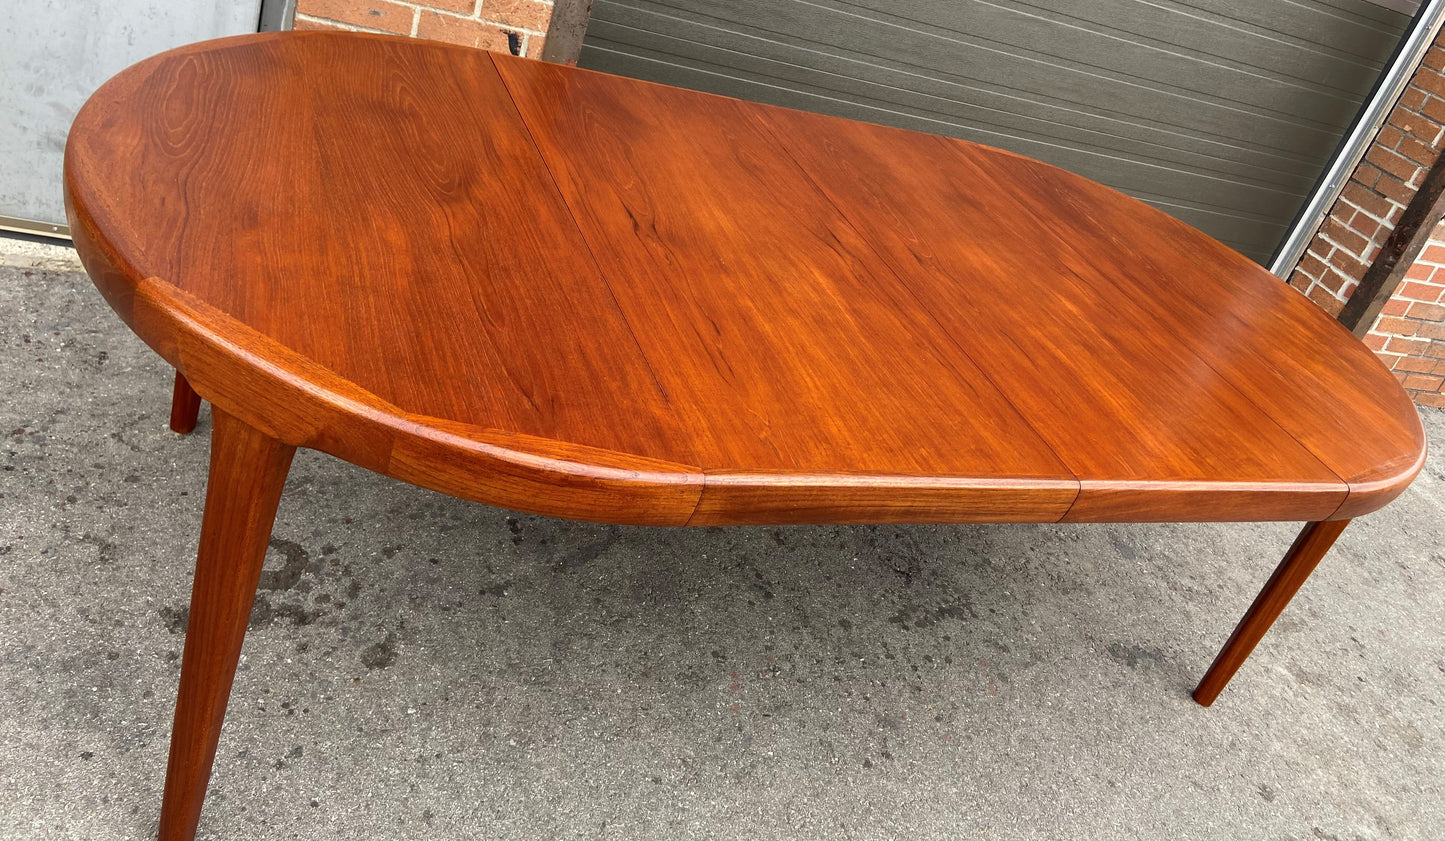 REFINISHED Danish Mid Century Modern Teak Table Round to Oval w 2 Leaves 47"-89"